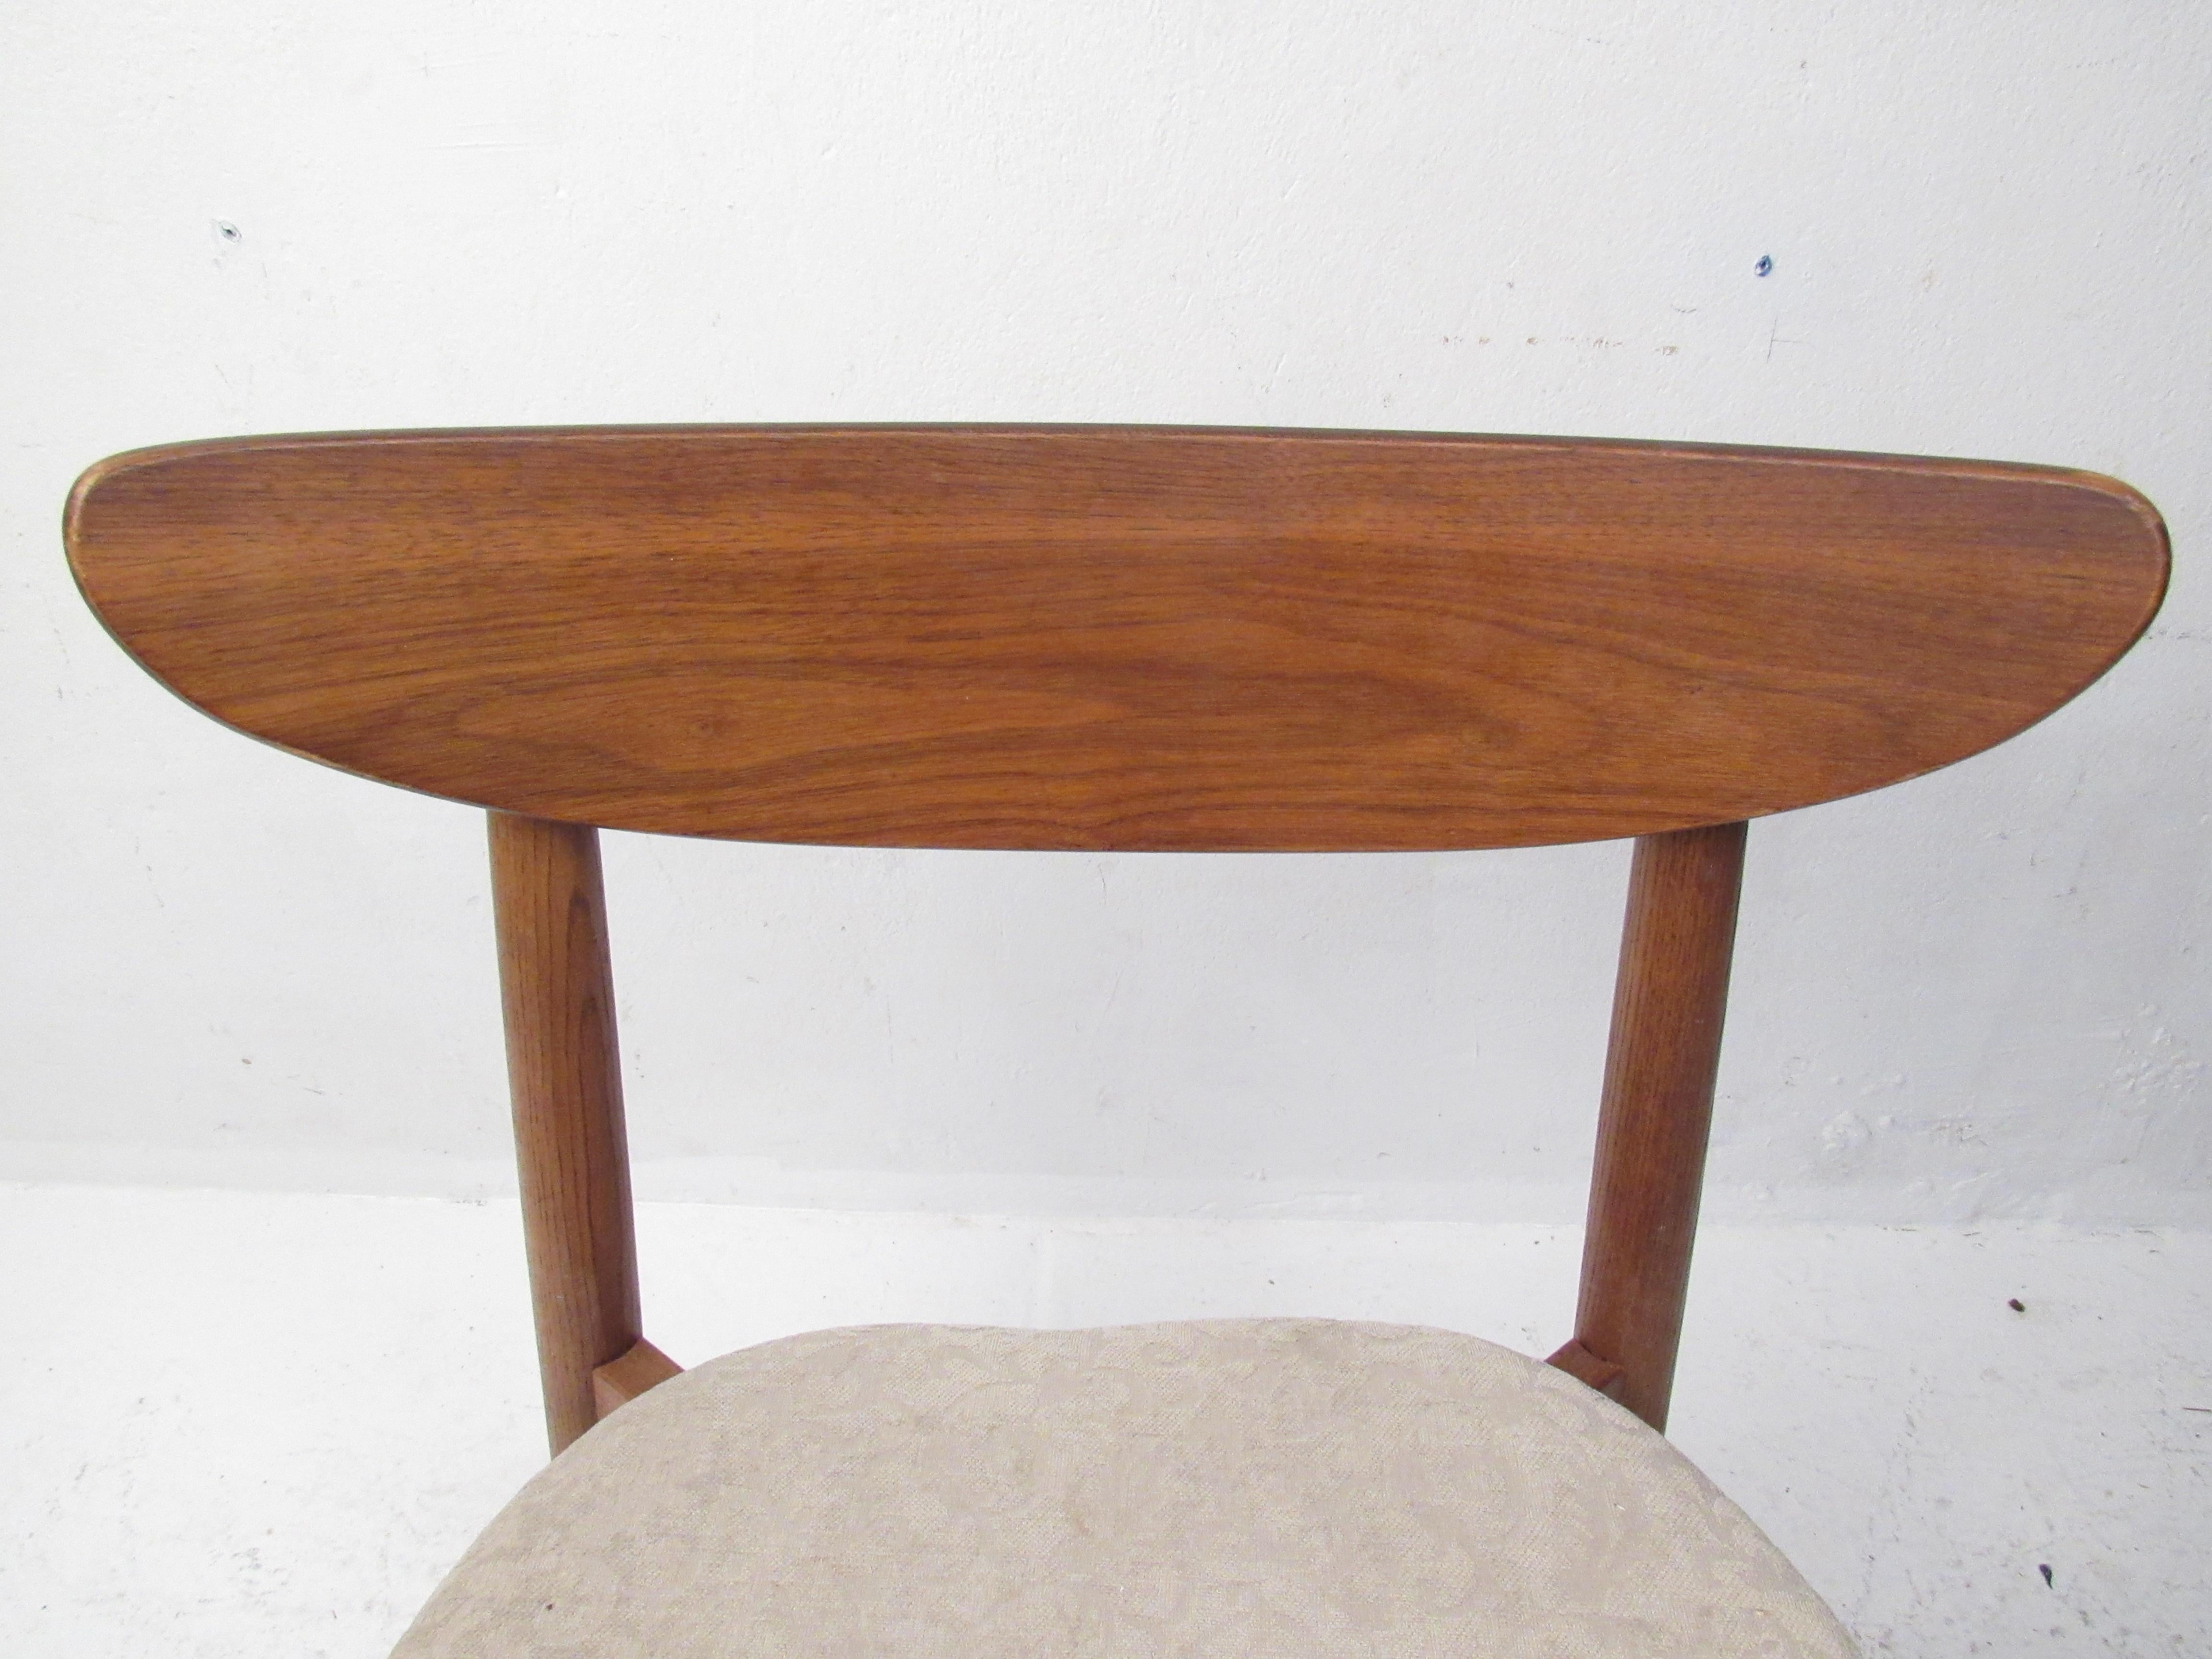 Upholstery Set of Four Mid-Century Modern Walnut Dining Chairs